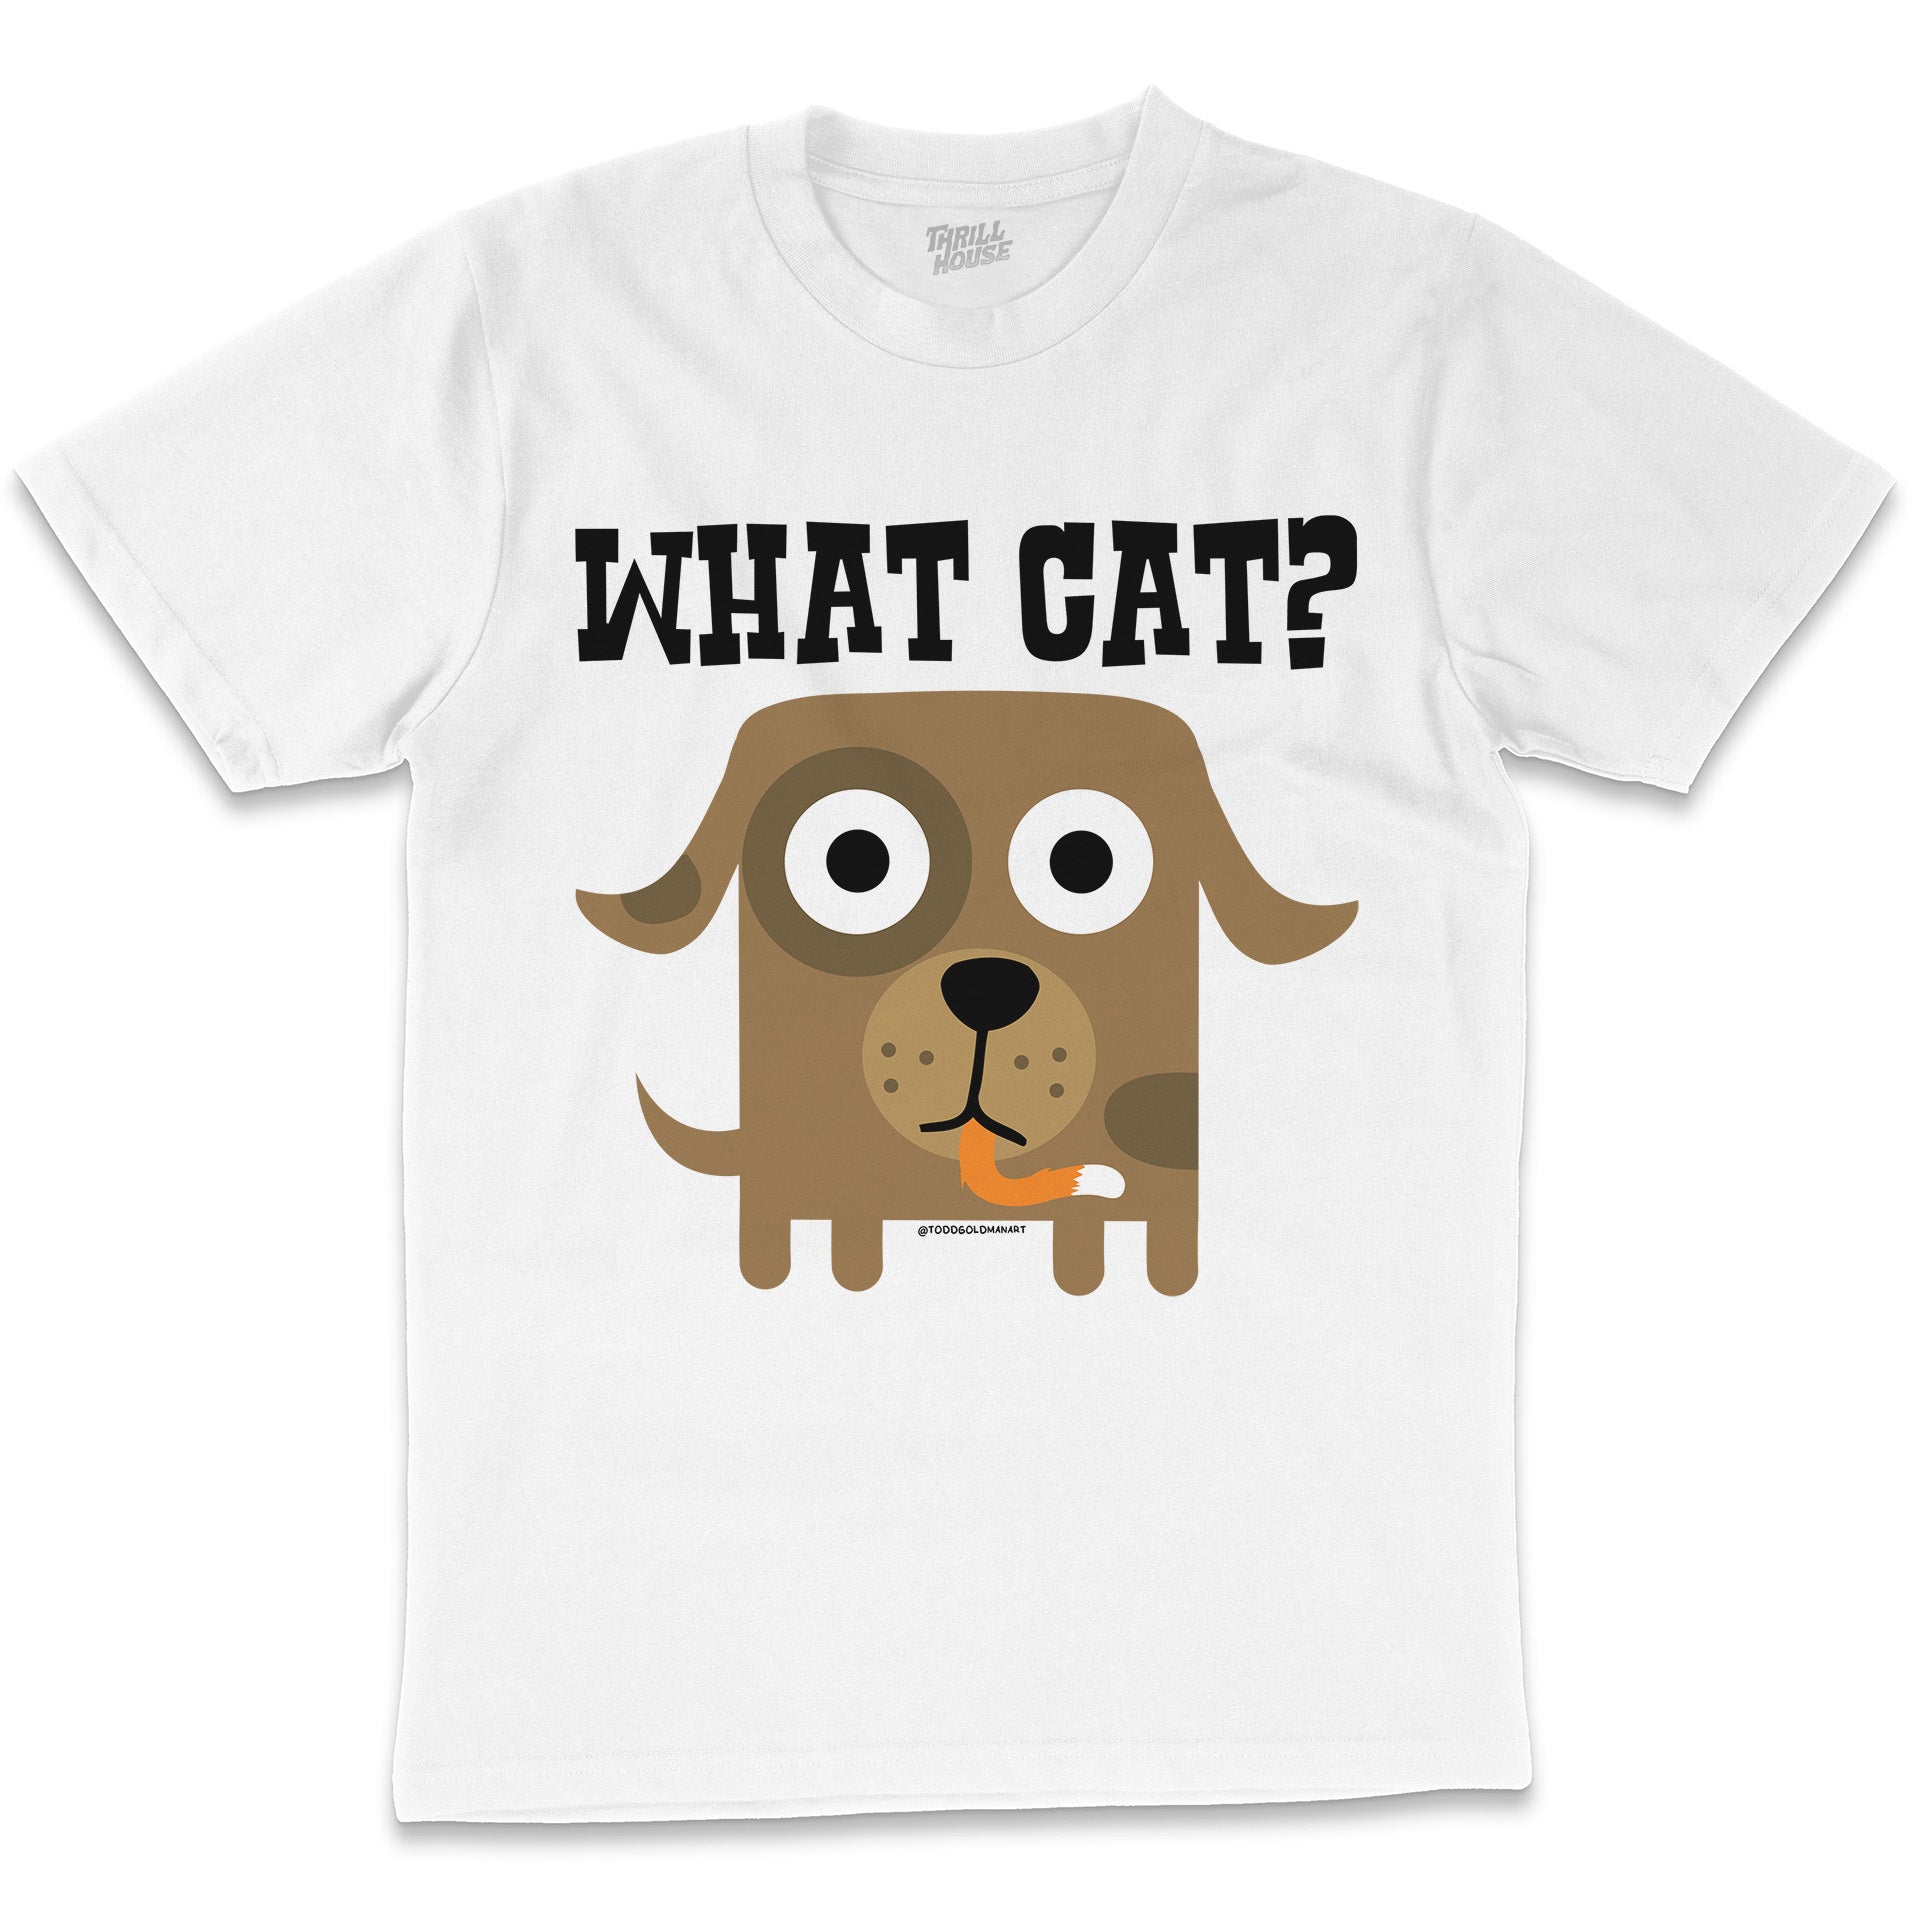 What Cat Funny Dog Eat Cat Fight Humorous Pet Incident Cartoon Cute Animal Cotton T-Shirt